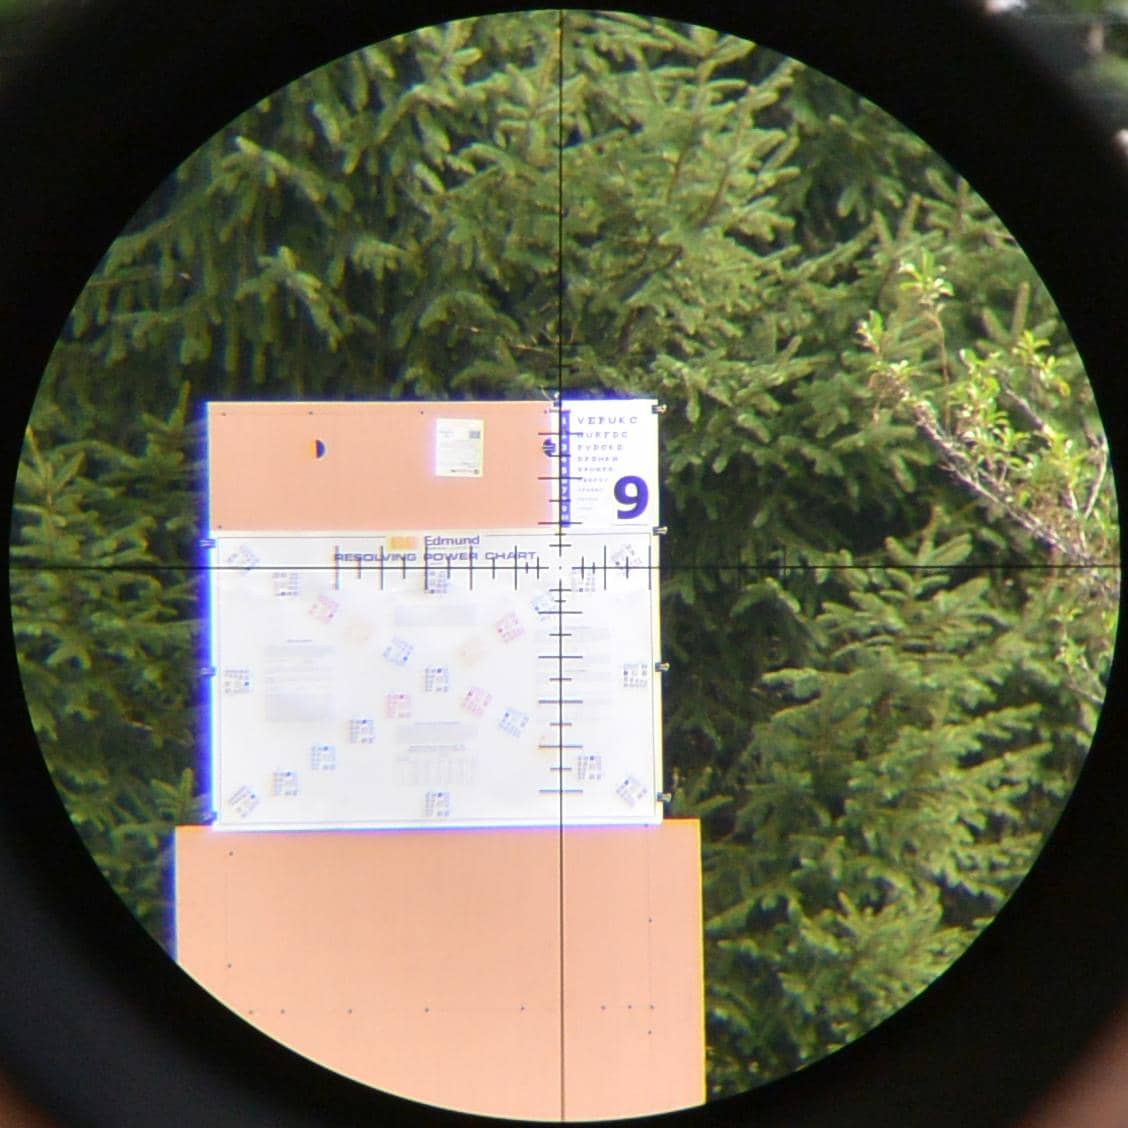 Sightron SIIISS624x50LRFFP/MH reticle on an optical test pattern